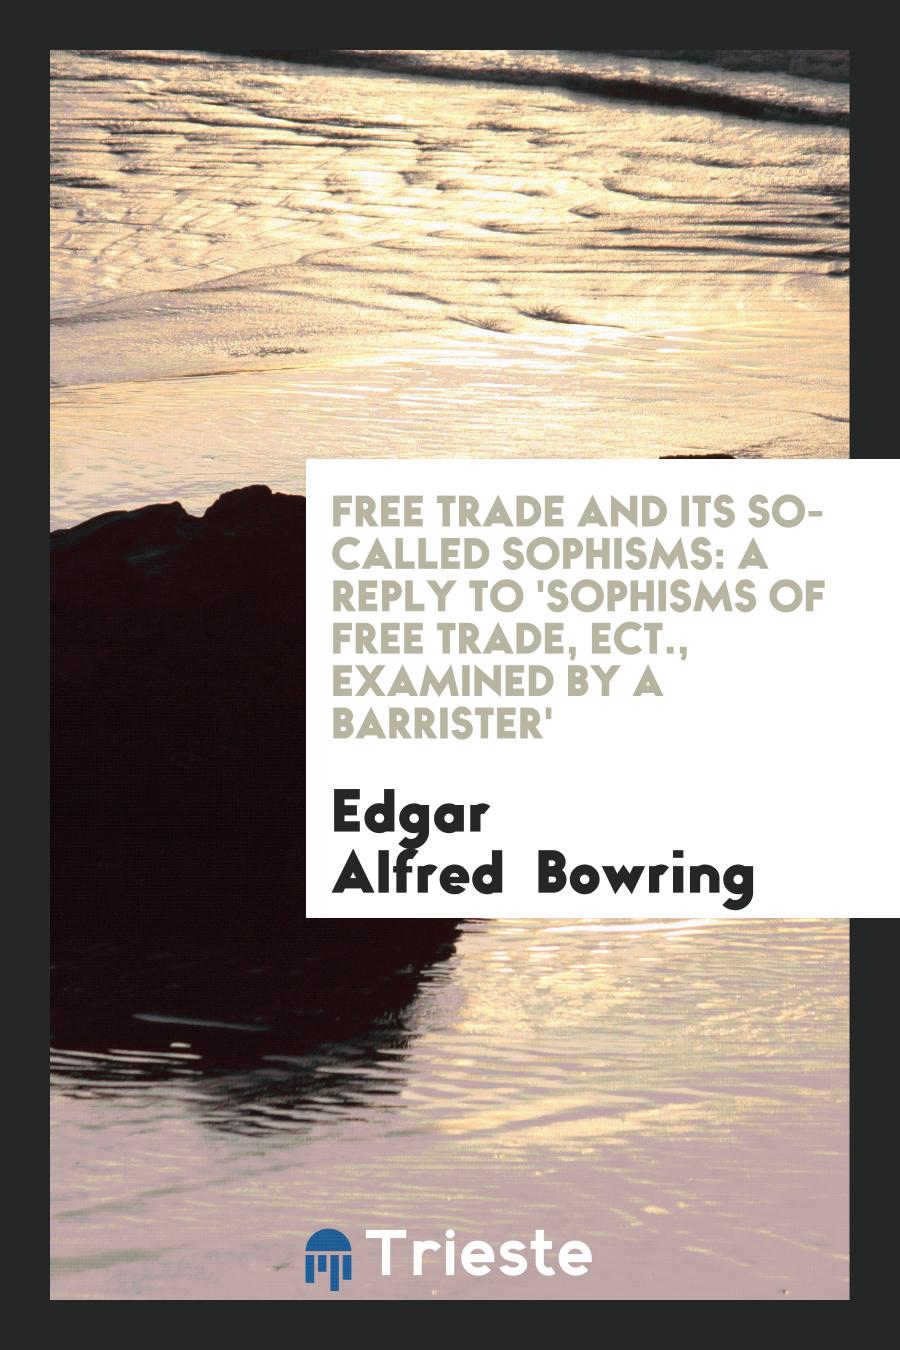 Free Trade and Its So-Called Sophisms: A Reply to 'Sophisms of Free Trade, Ect., Examined by A Barrister'